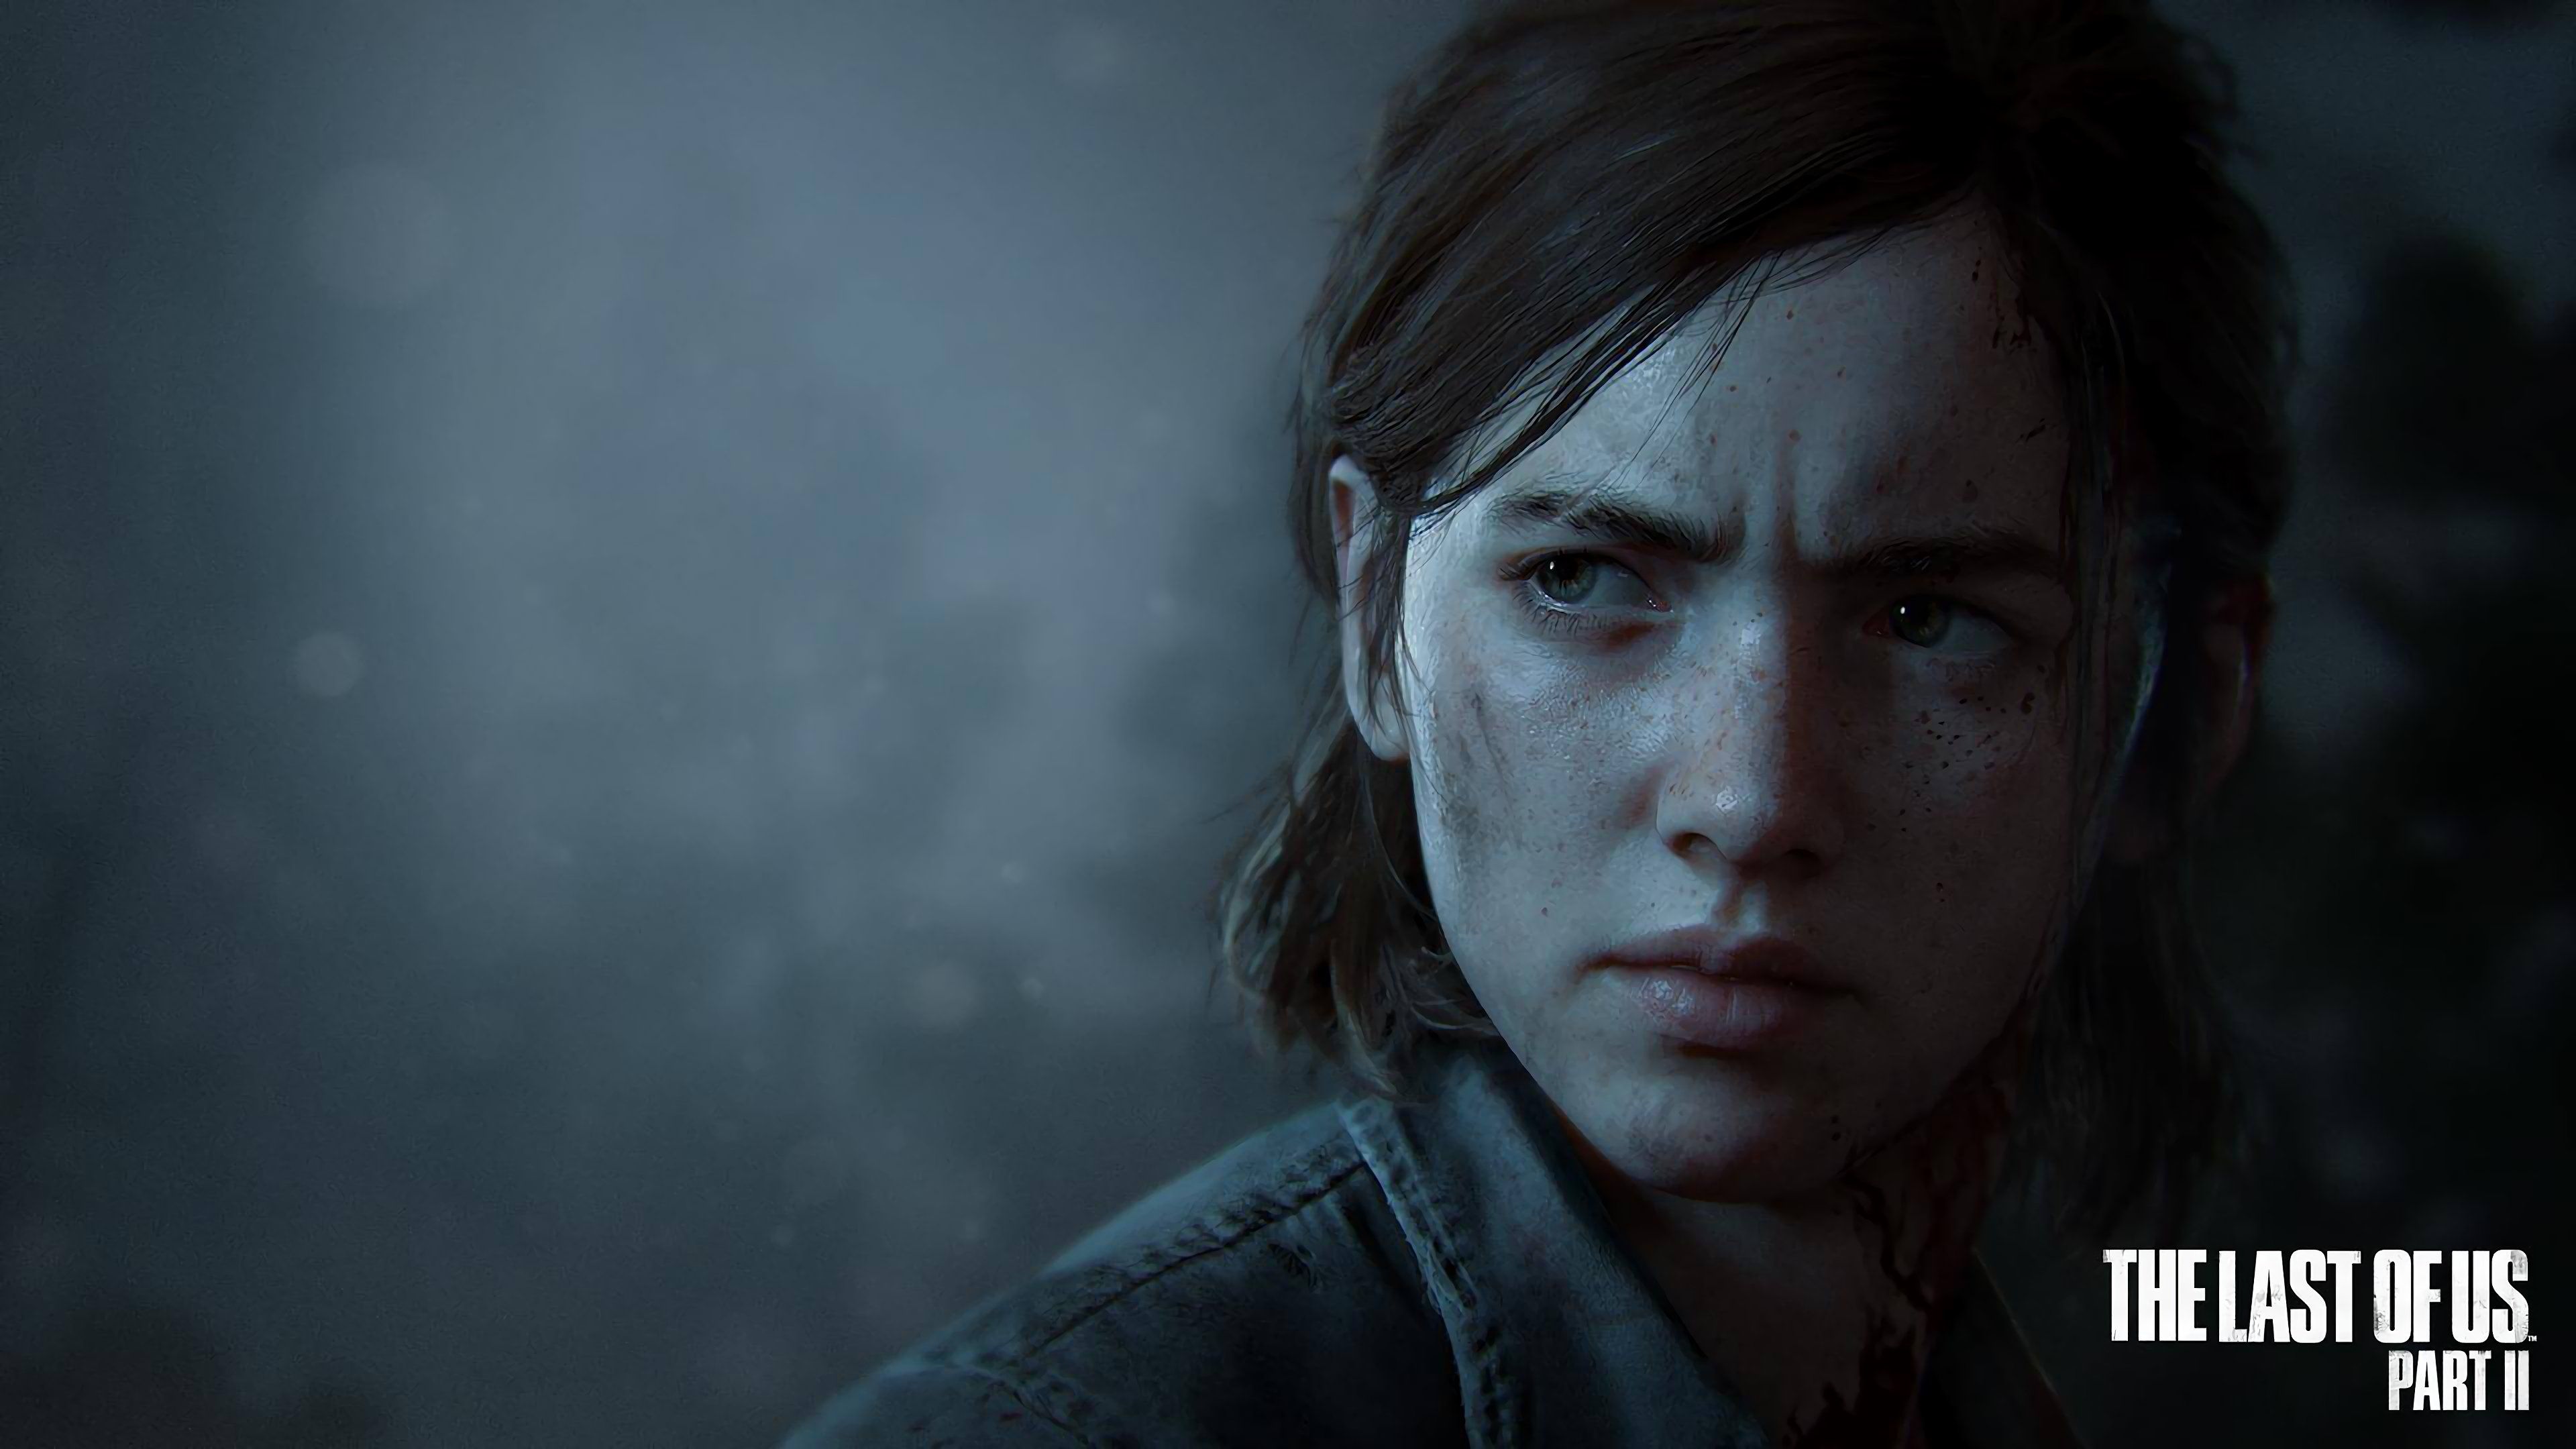 Wallpaper : The Last of Us, The Last of Us 2, the last of us part II,  Ellie, video games, Naughty Dog 3840x2160 - tiv311 - 1904239 - HD Wallpapers  - WallHere